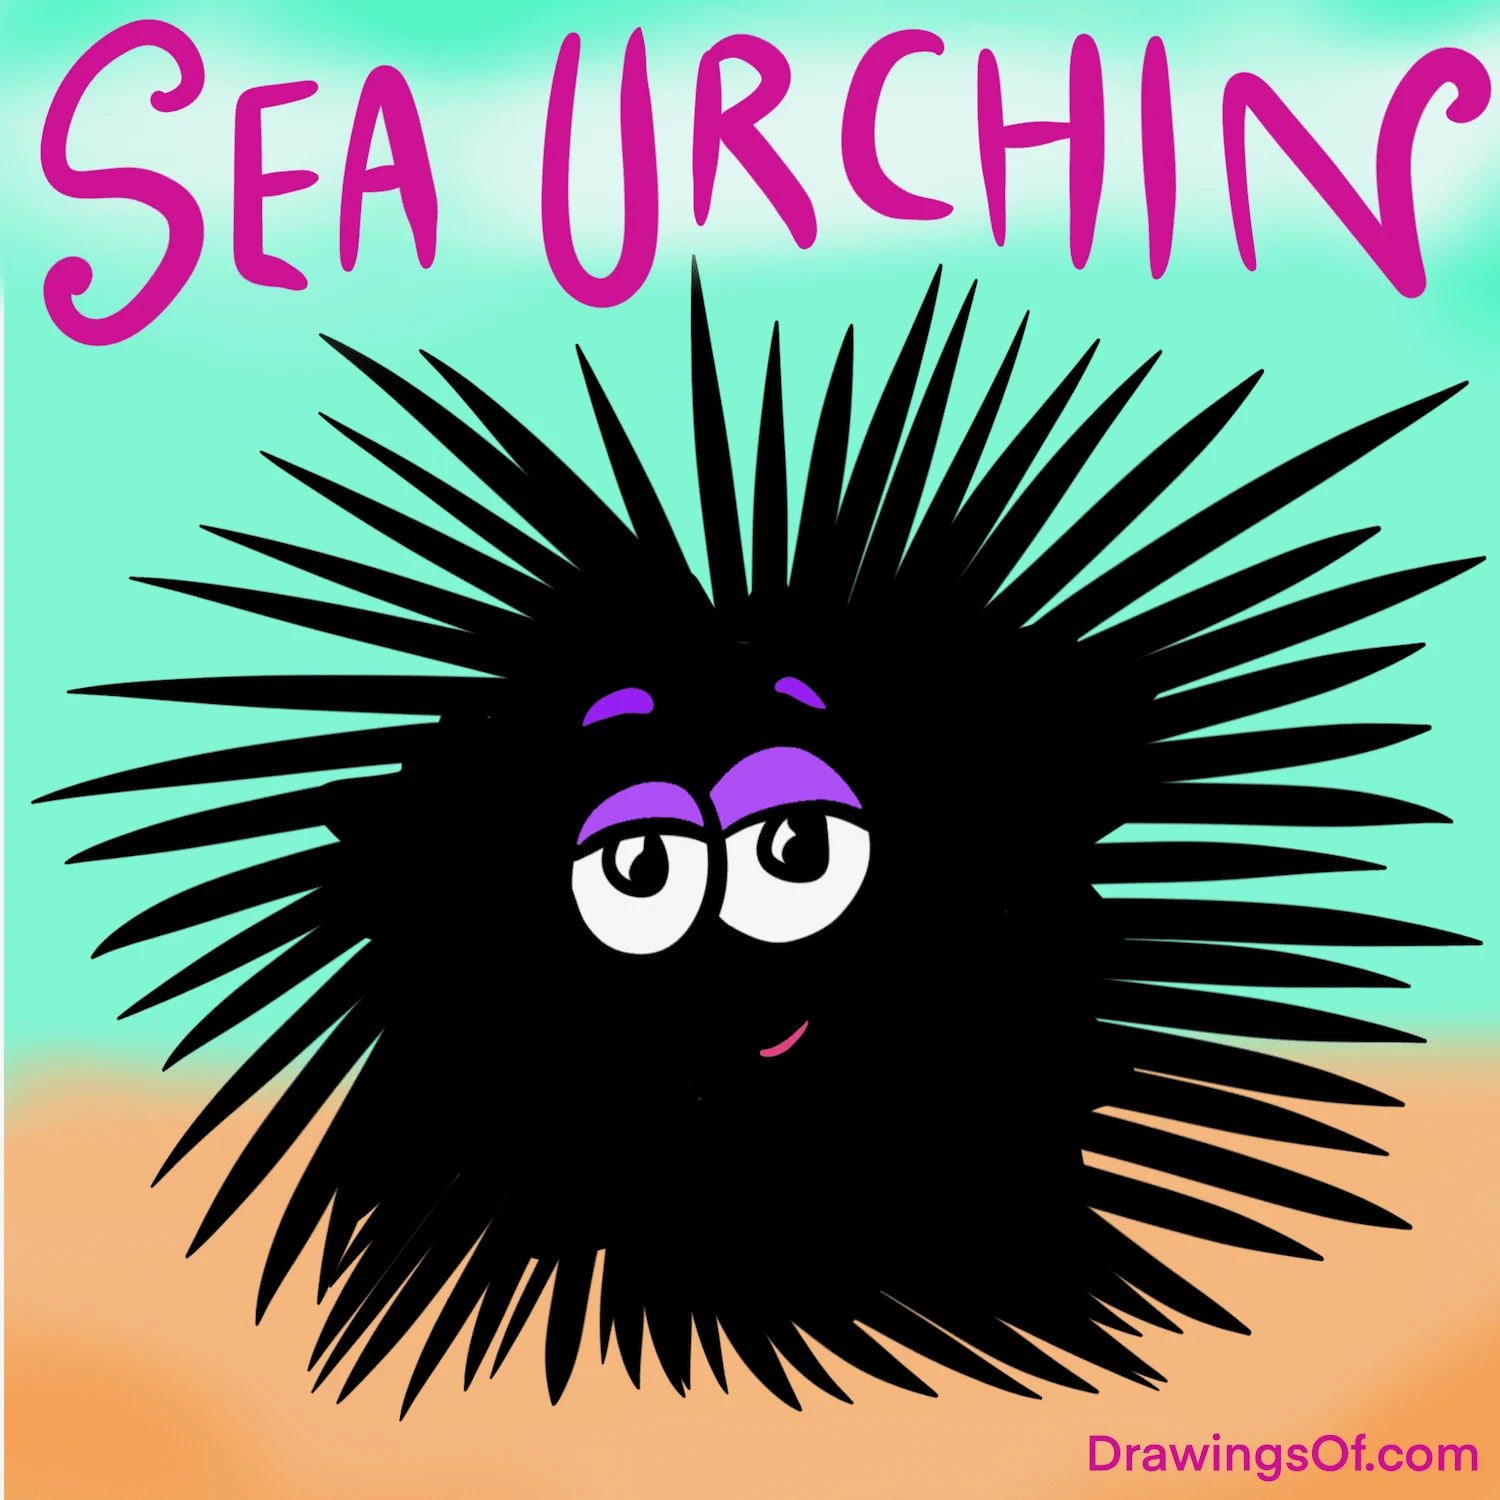 Easy drawing of a sea urchin